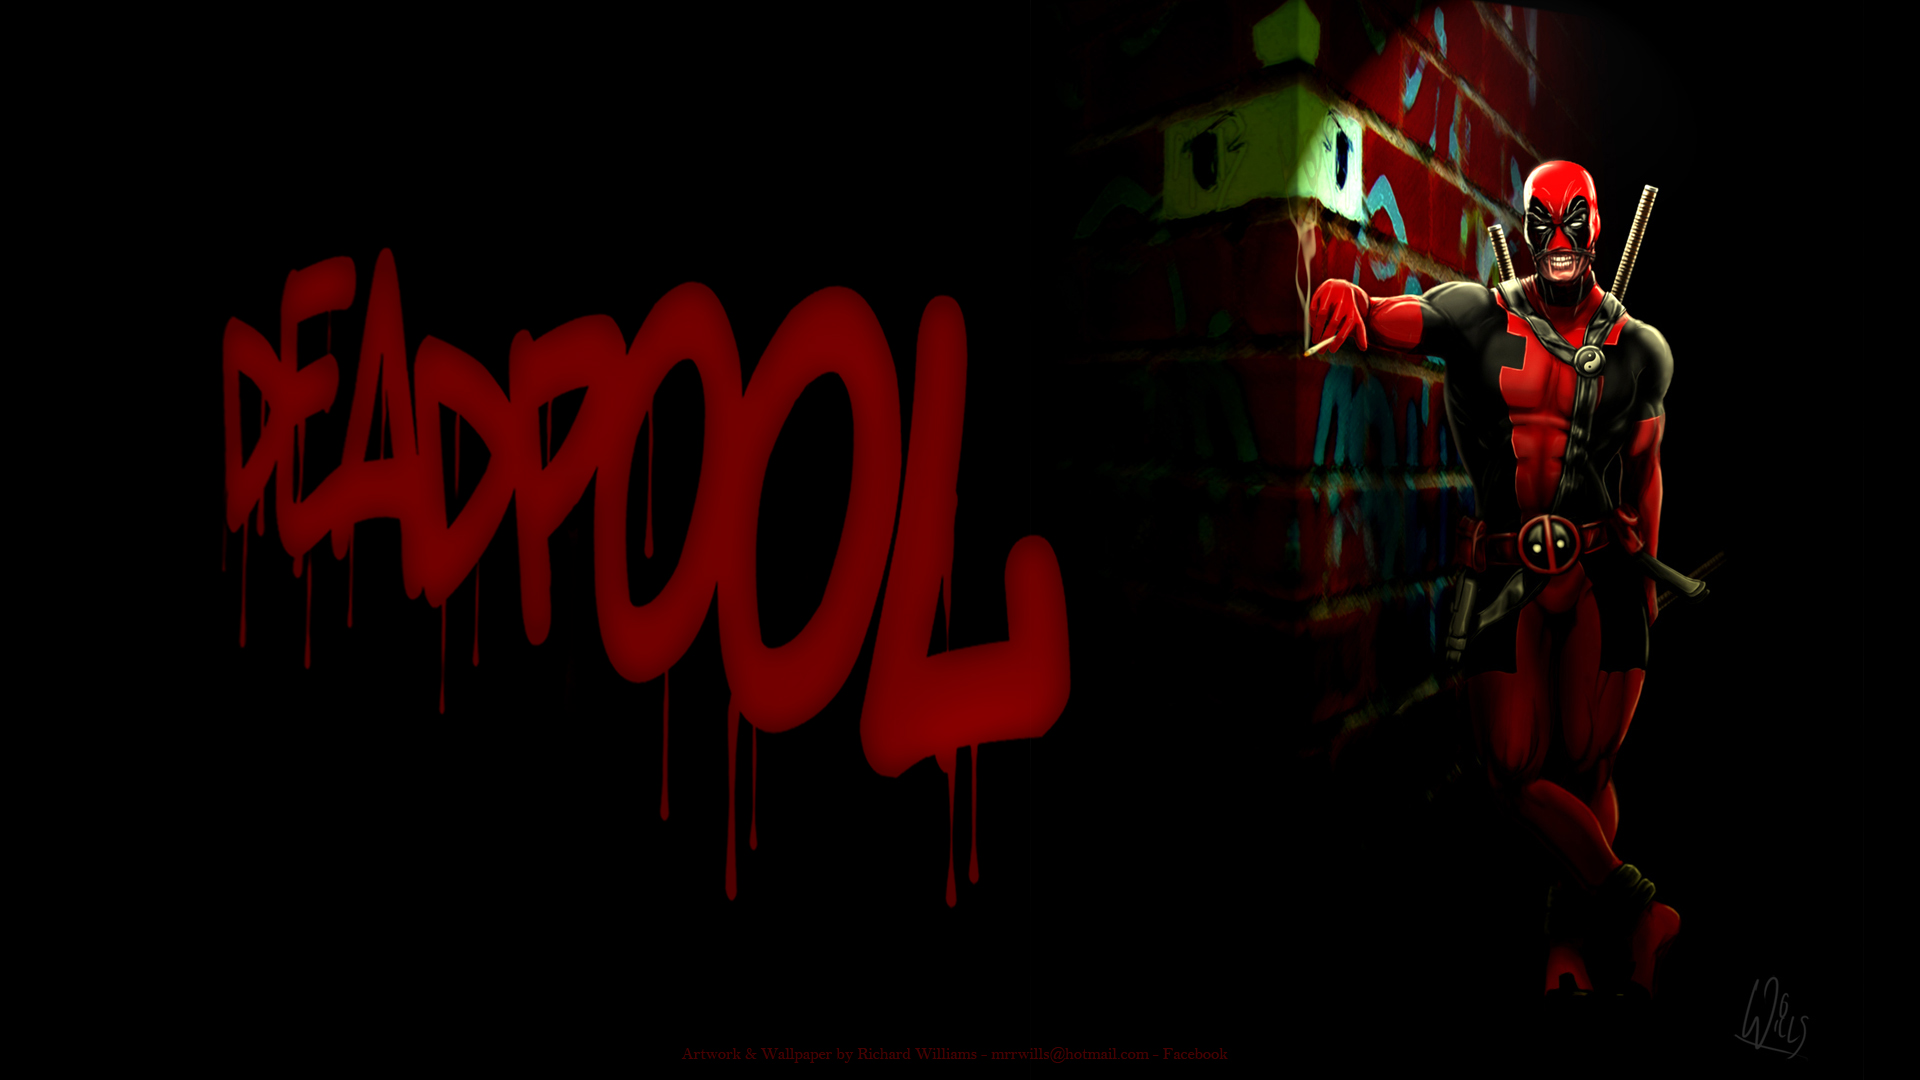 Top Cool Deadpool Wallpaper Image For